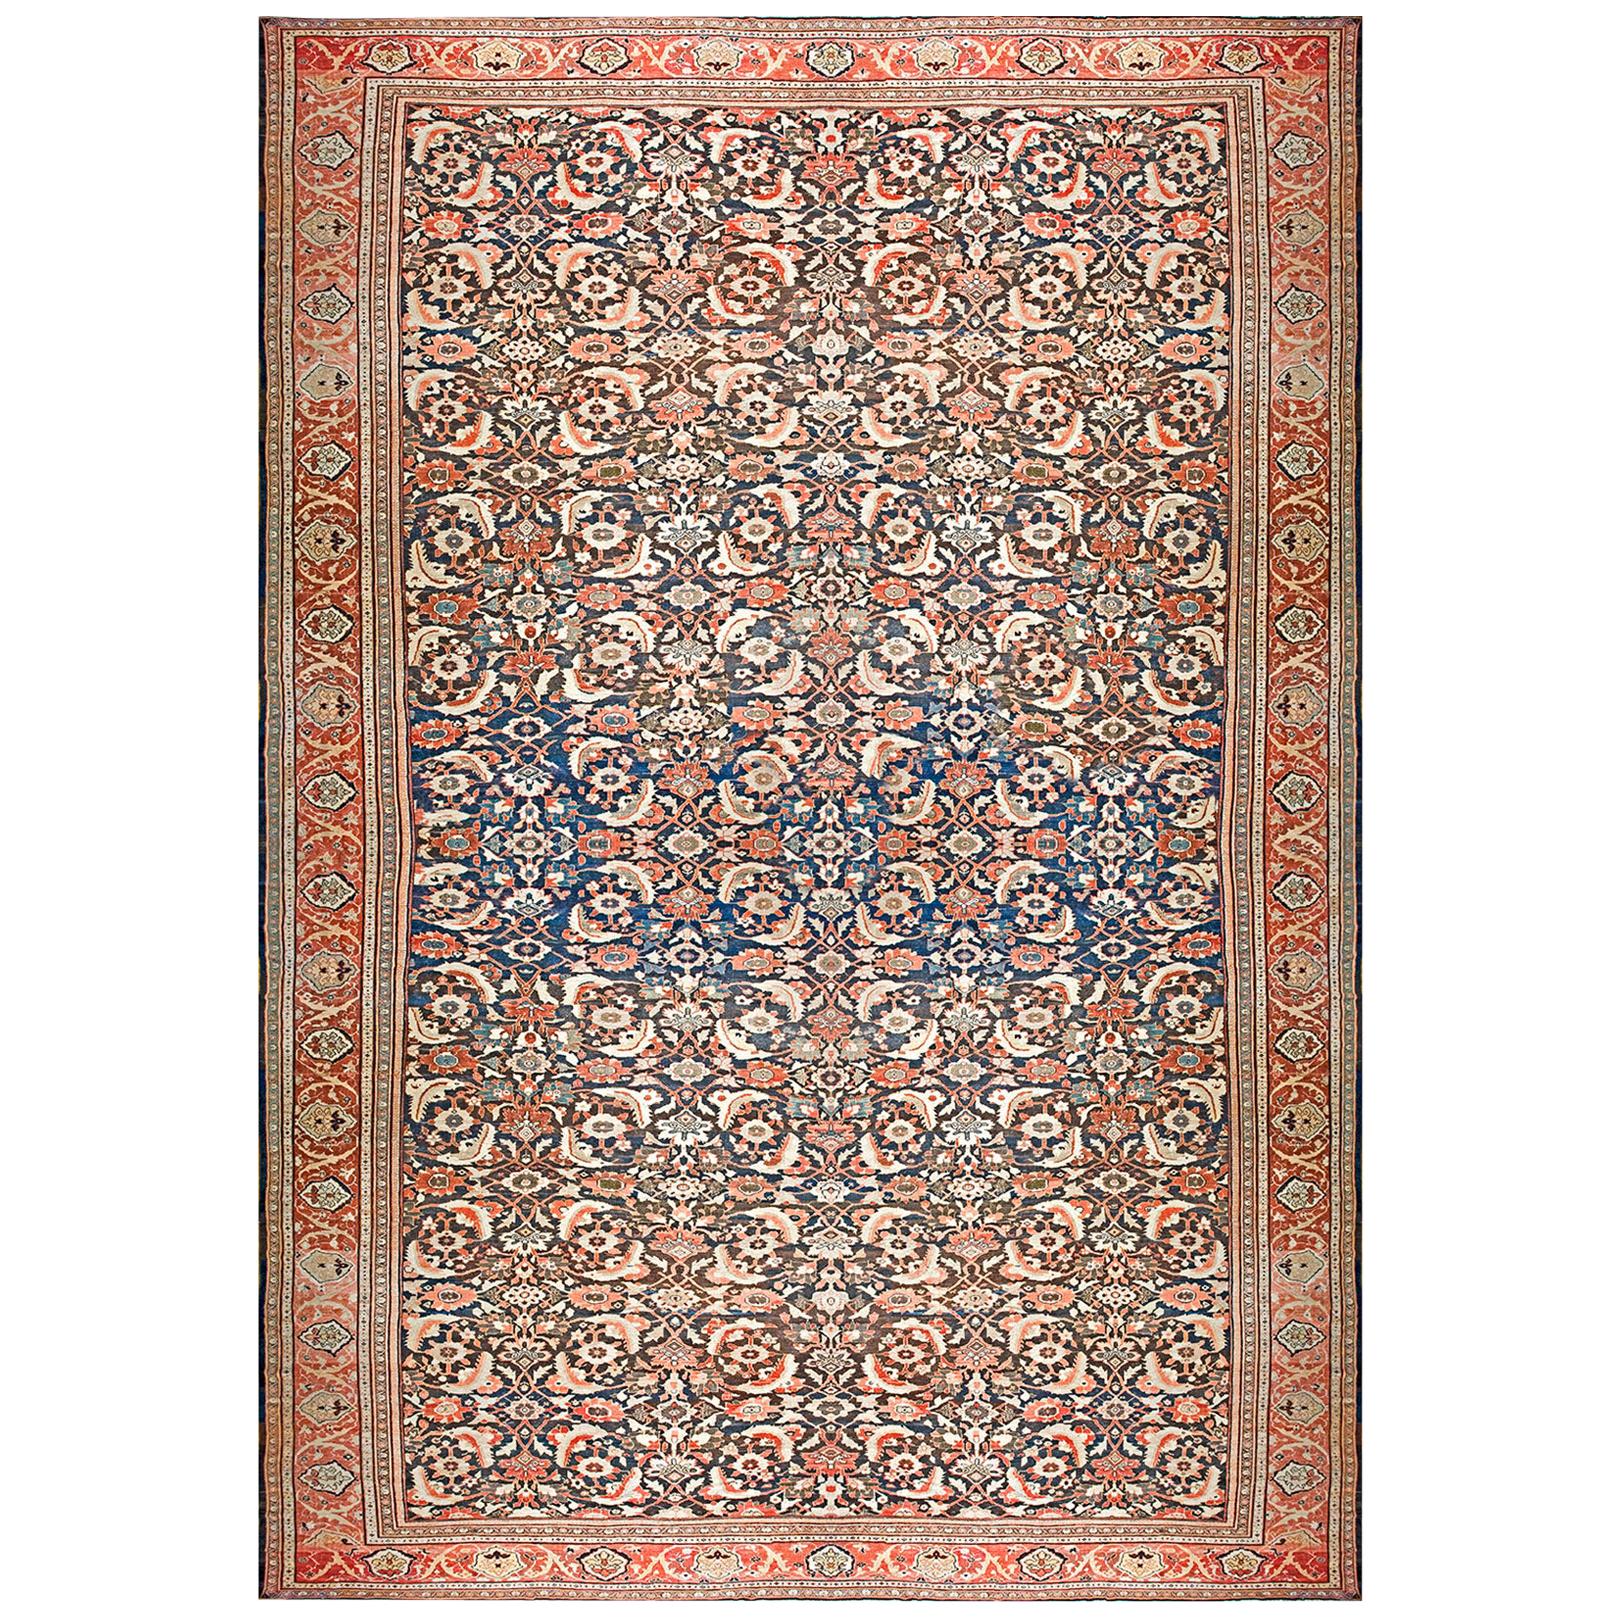 19th Century Persian Sultanabad Carpet ( 22'2" x 38'2 - 676 x 1163 ) For Sale